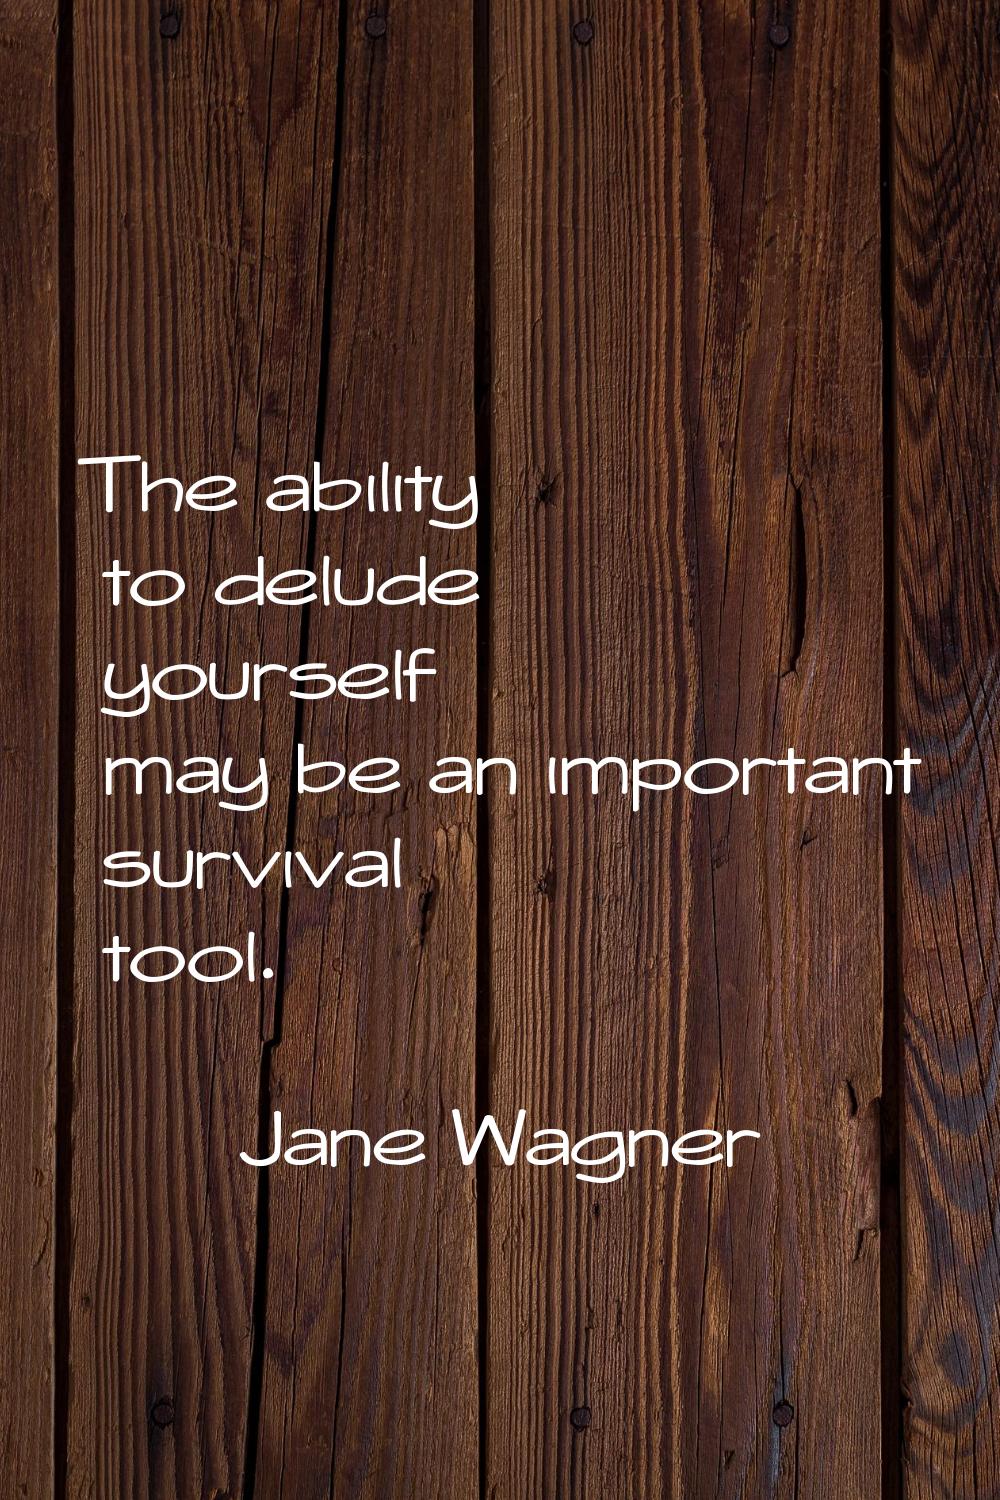 The ability to delude yourself may be an important survival tool.